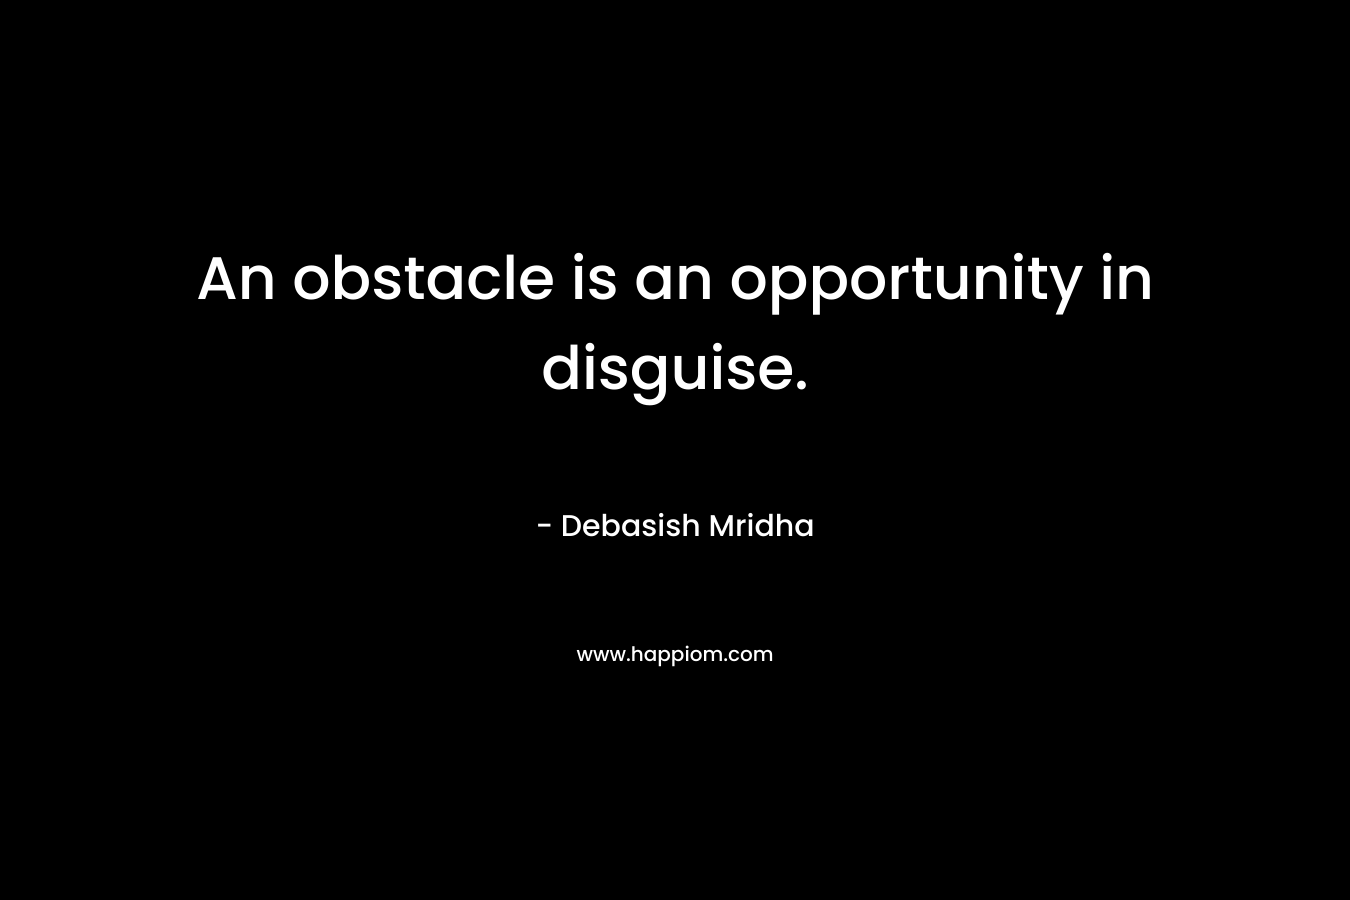 An obstacle is an opportunity in disguise.